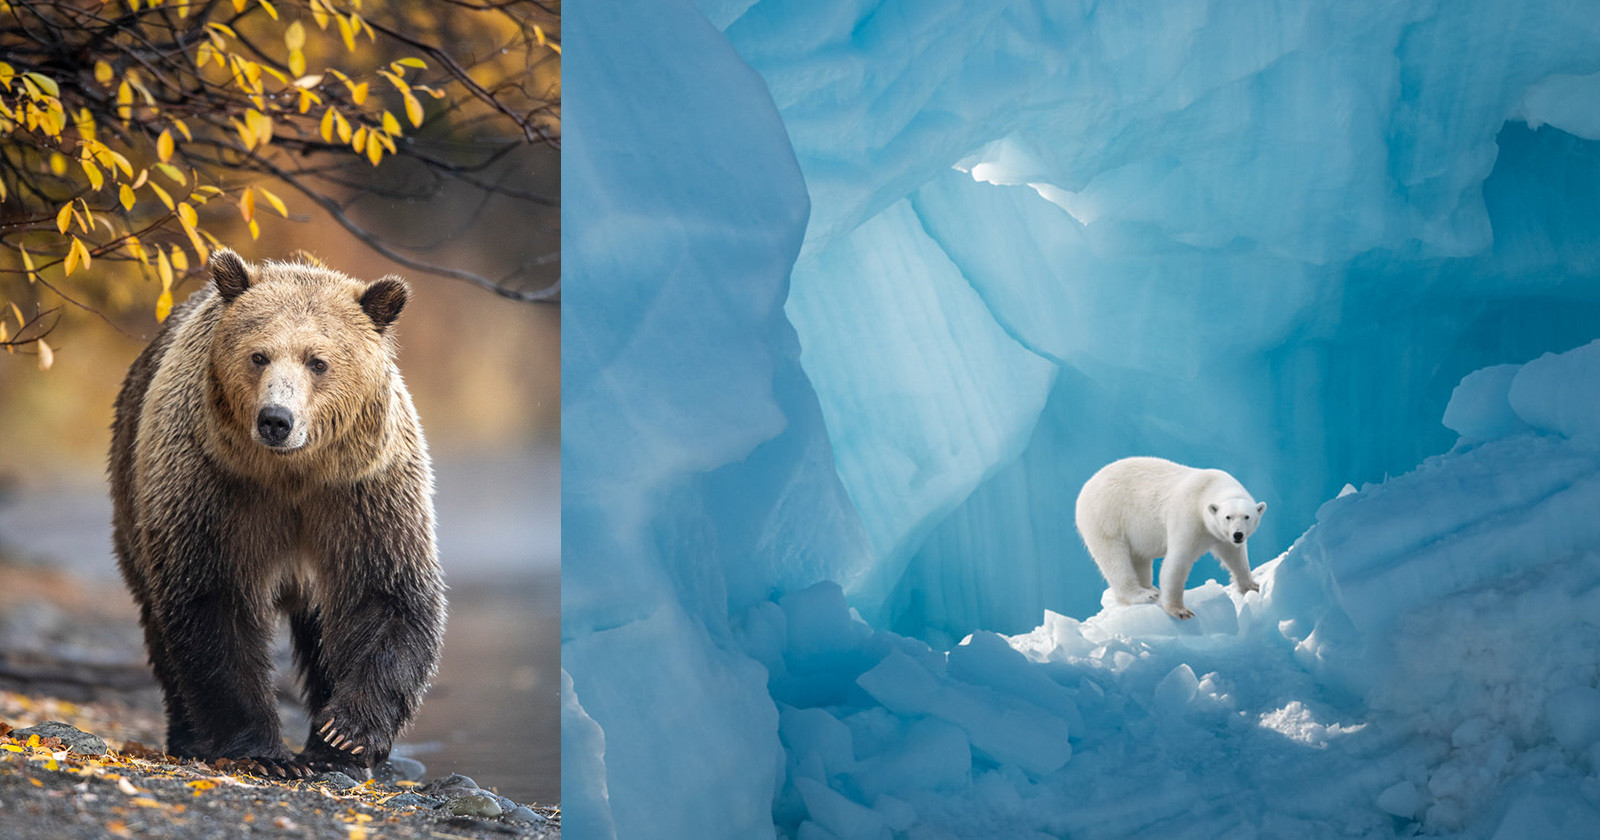  photo book showcases remaining bear species earth 